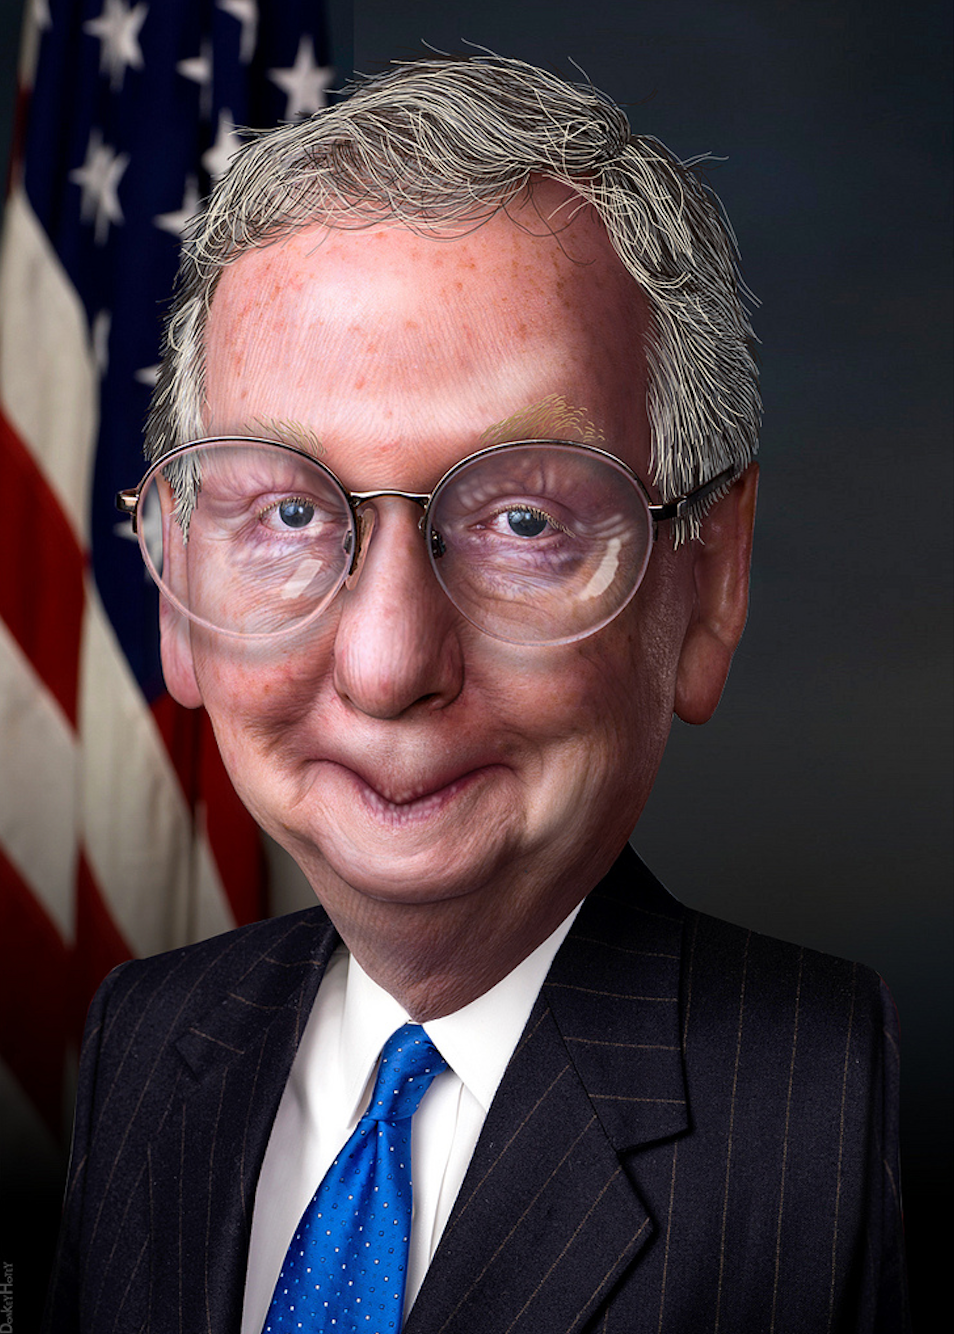 Mitch mcconnell with dick in mouth